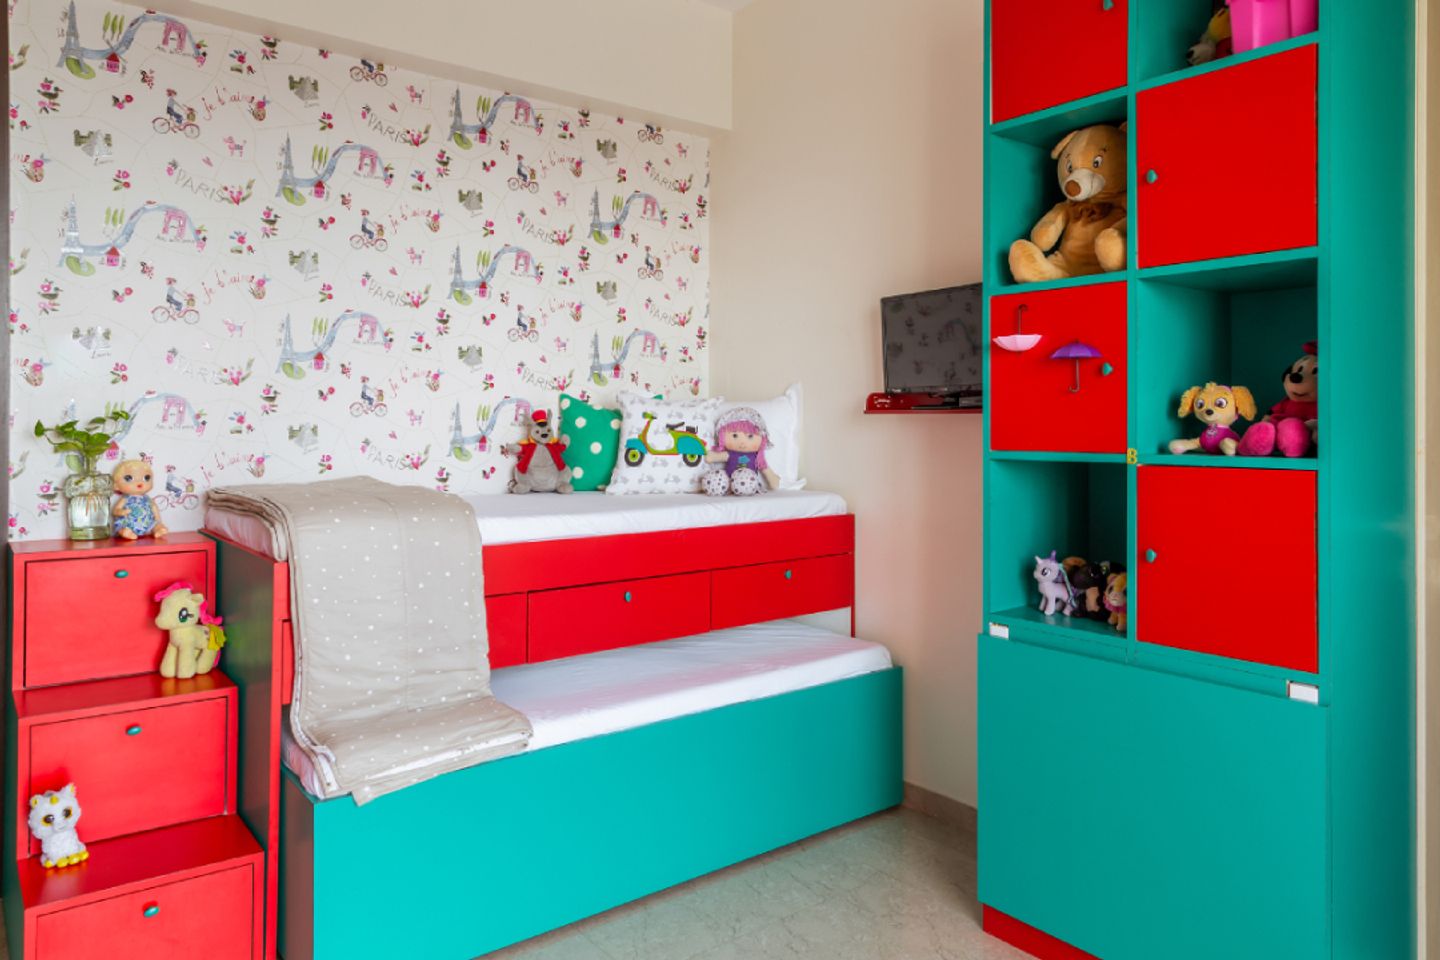 10x10 Ft Kids Room Design For Girls With Teal And Red Storage Units - Livspace